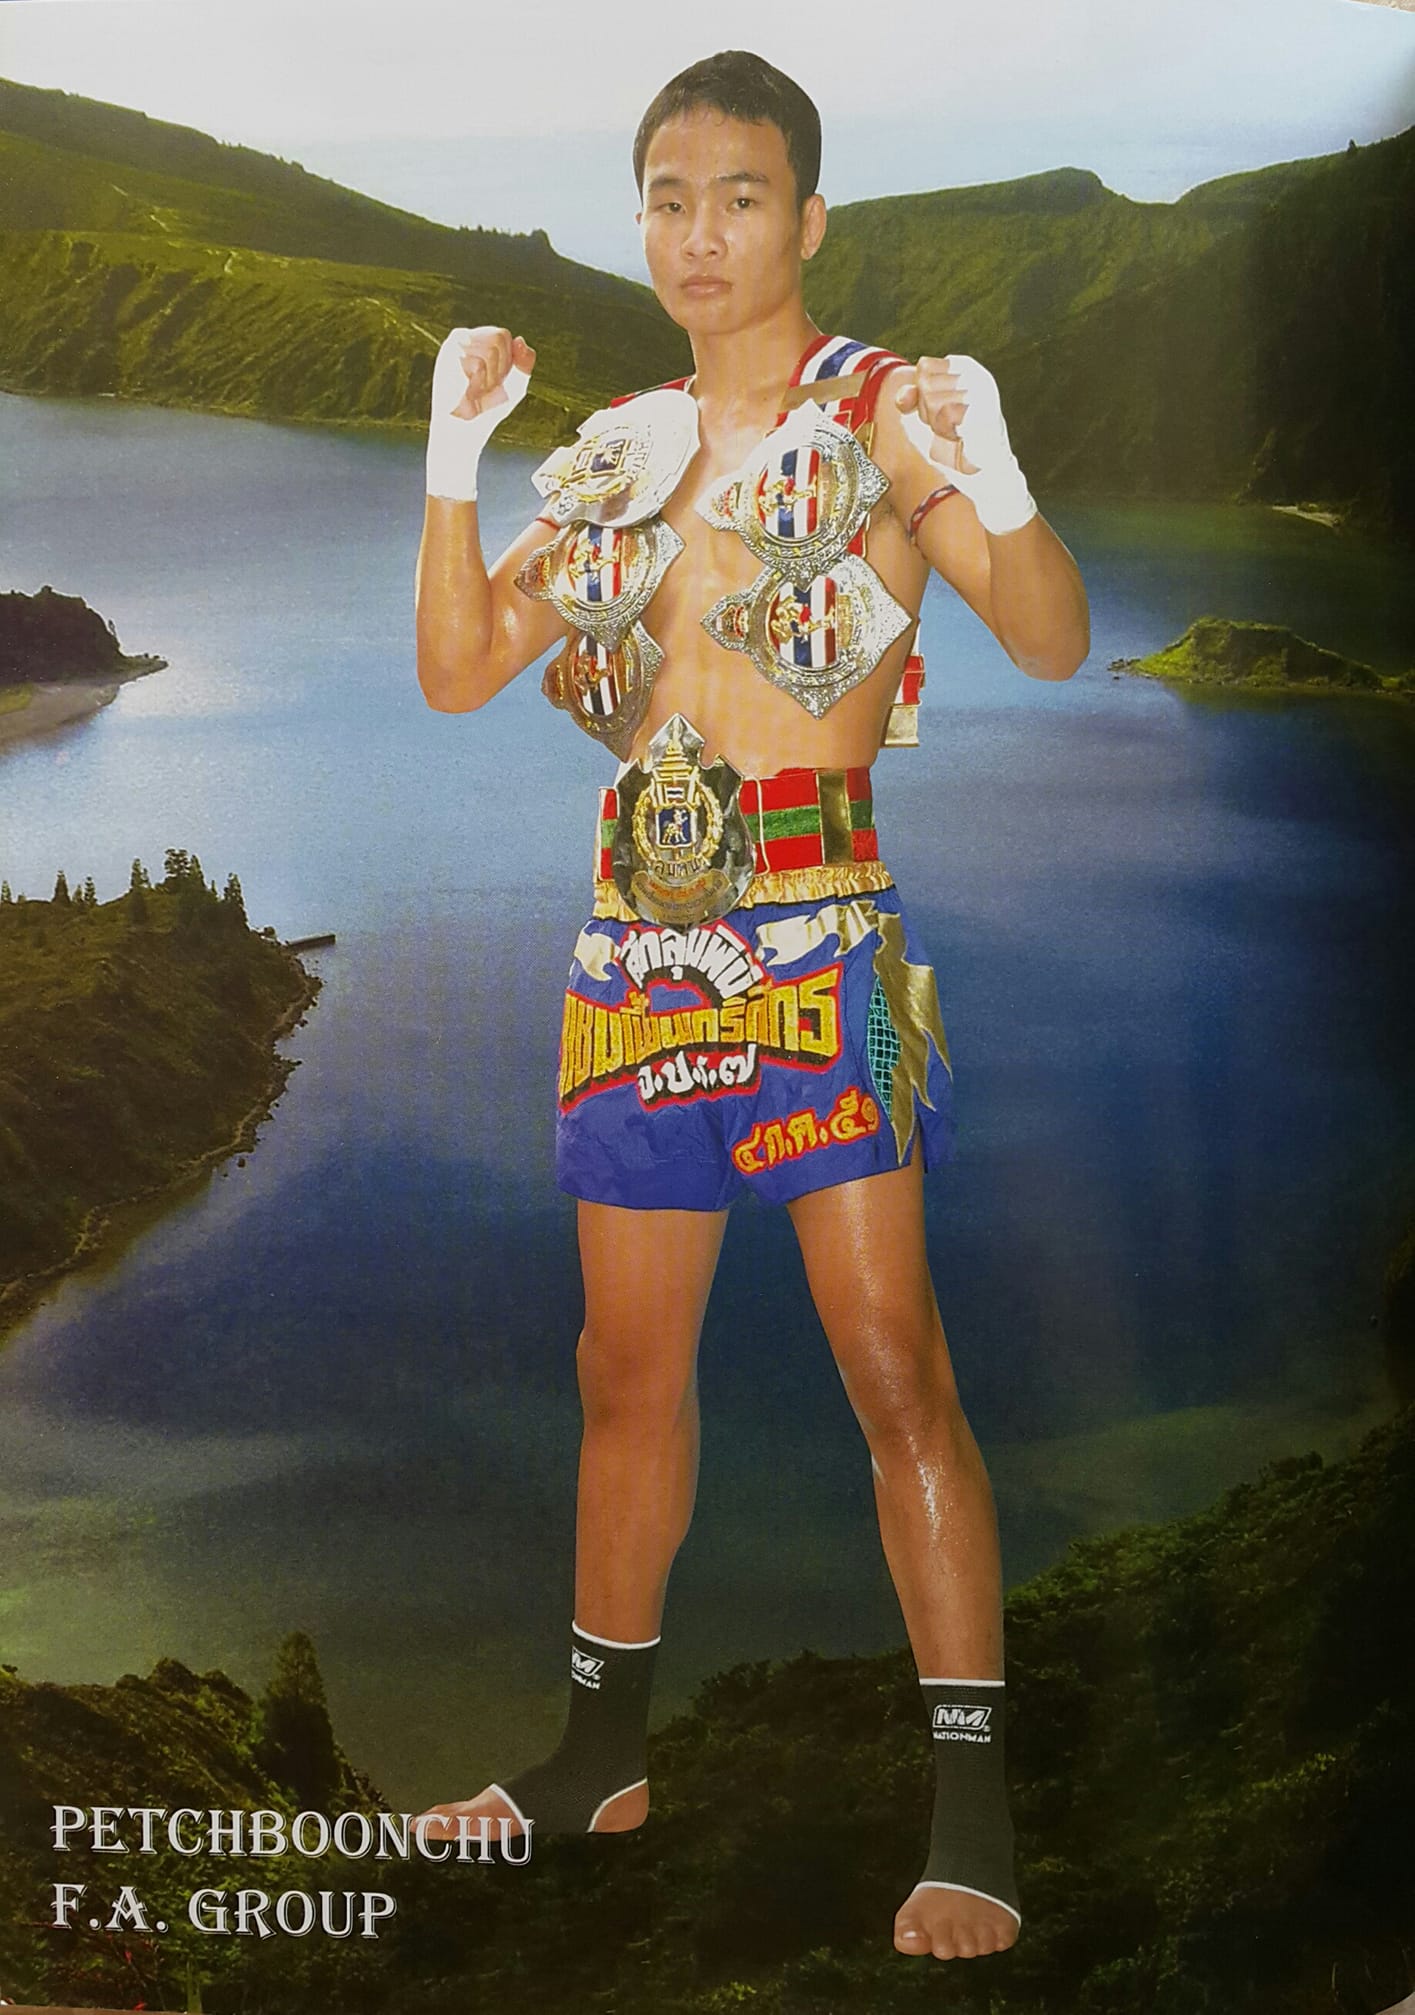 A photo of Petchboonchu FA Group with Muay Thai belts